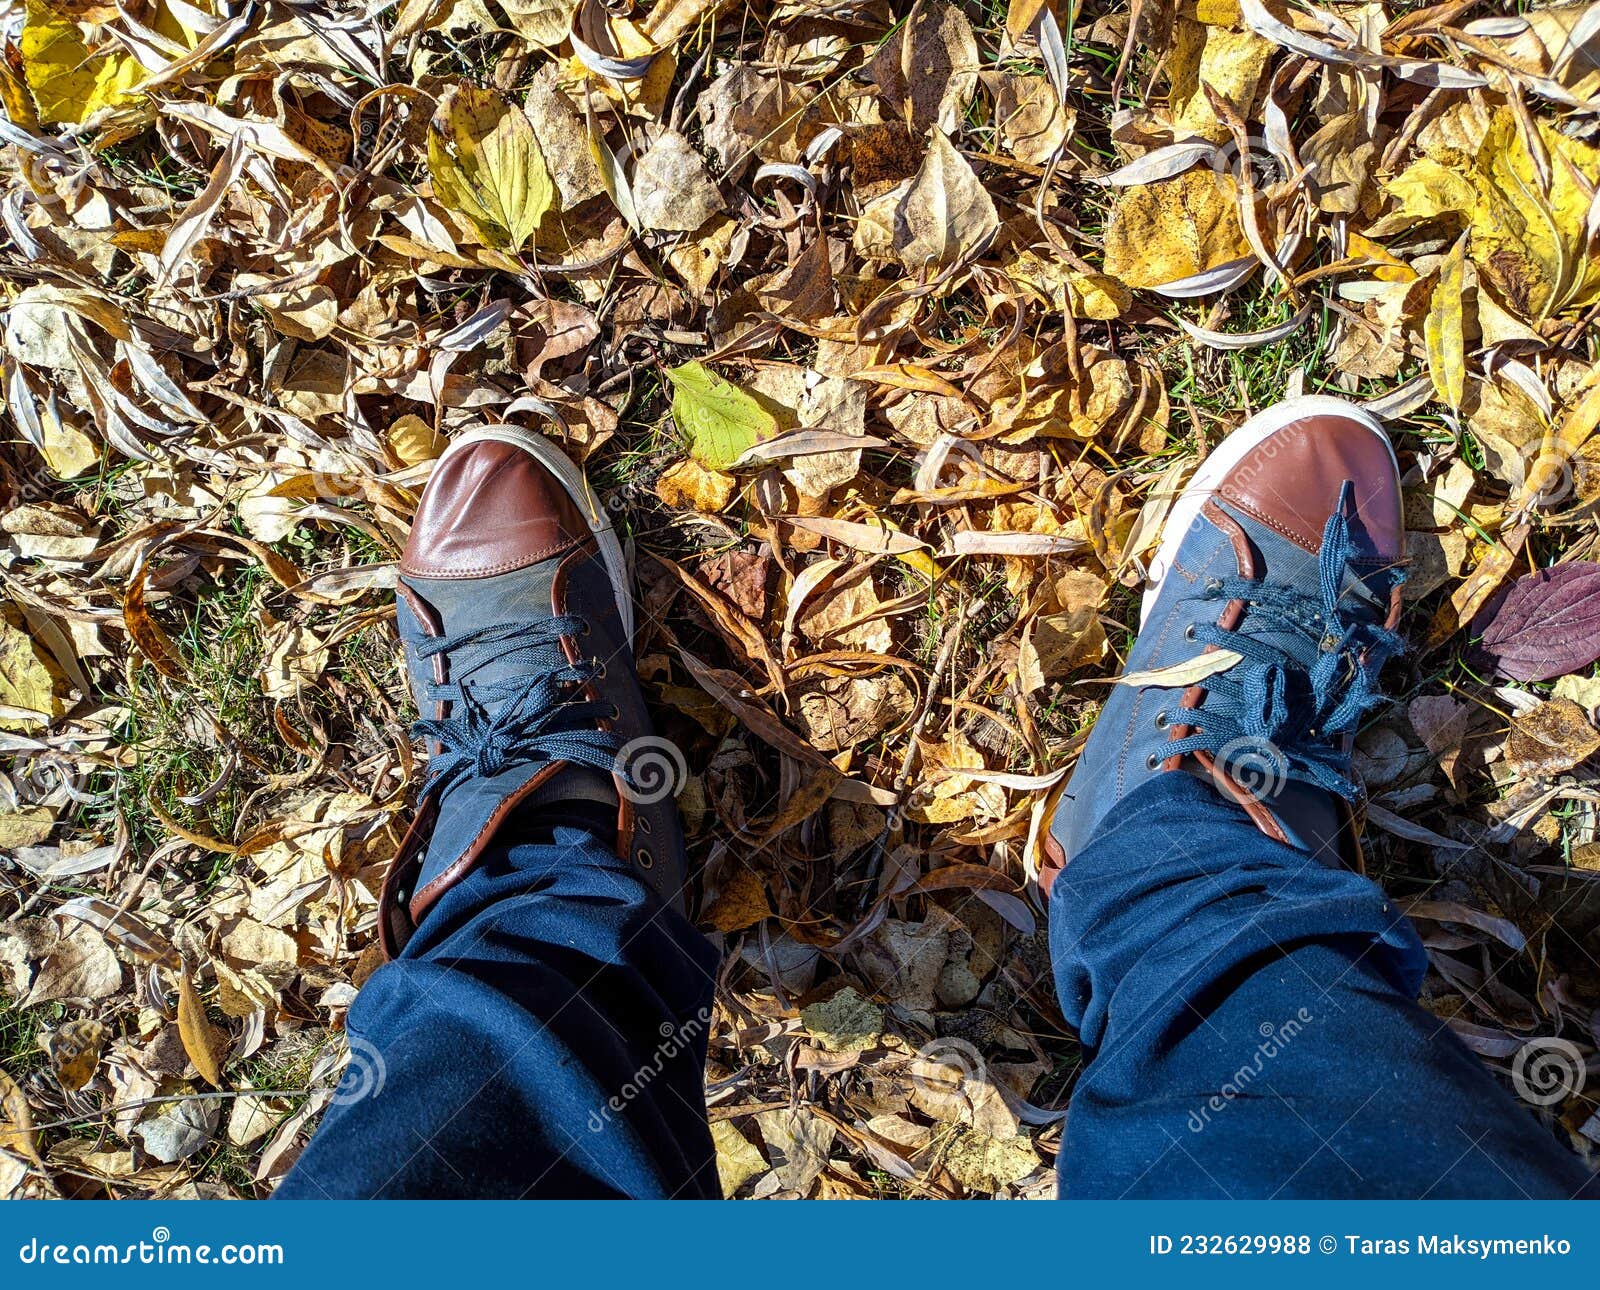 shoes and autumn leaves